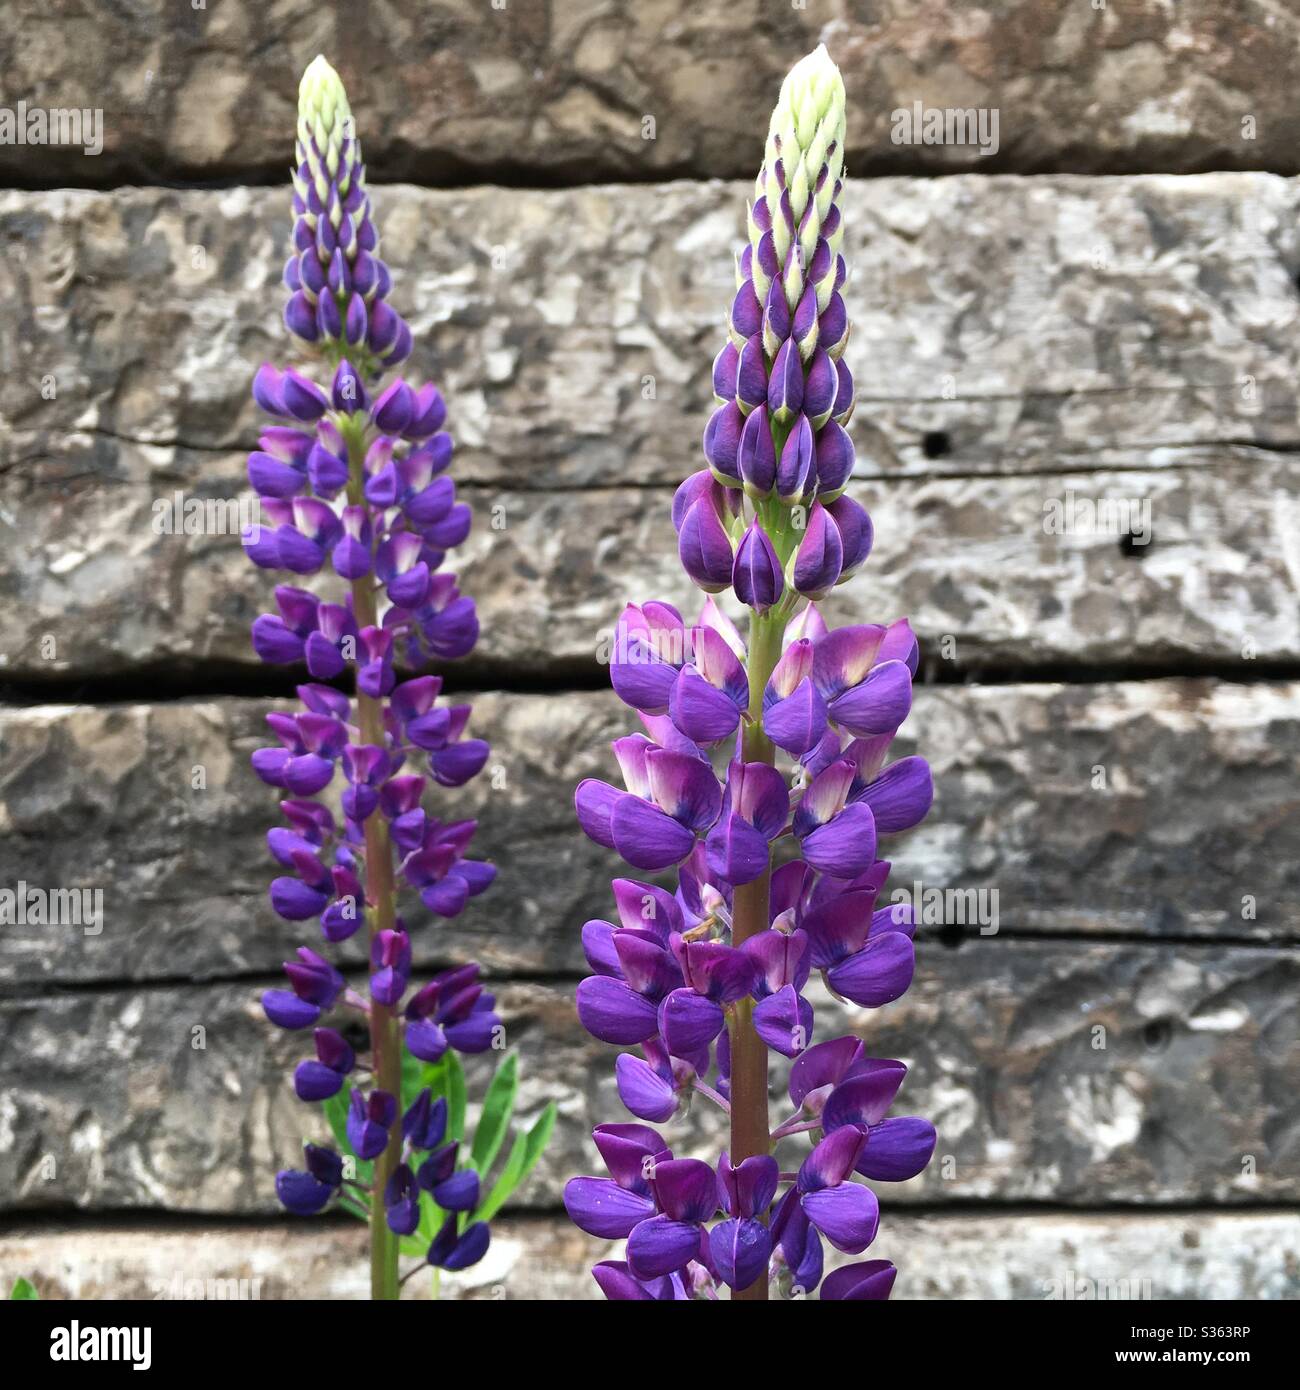 A photograph of two deep purple lupin flowers in full bloom against a wooden sleeper log background Stock Photo